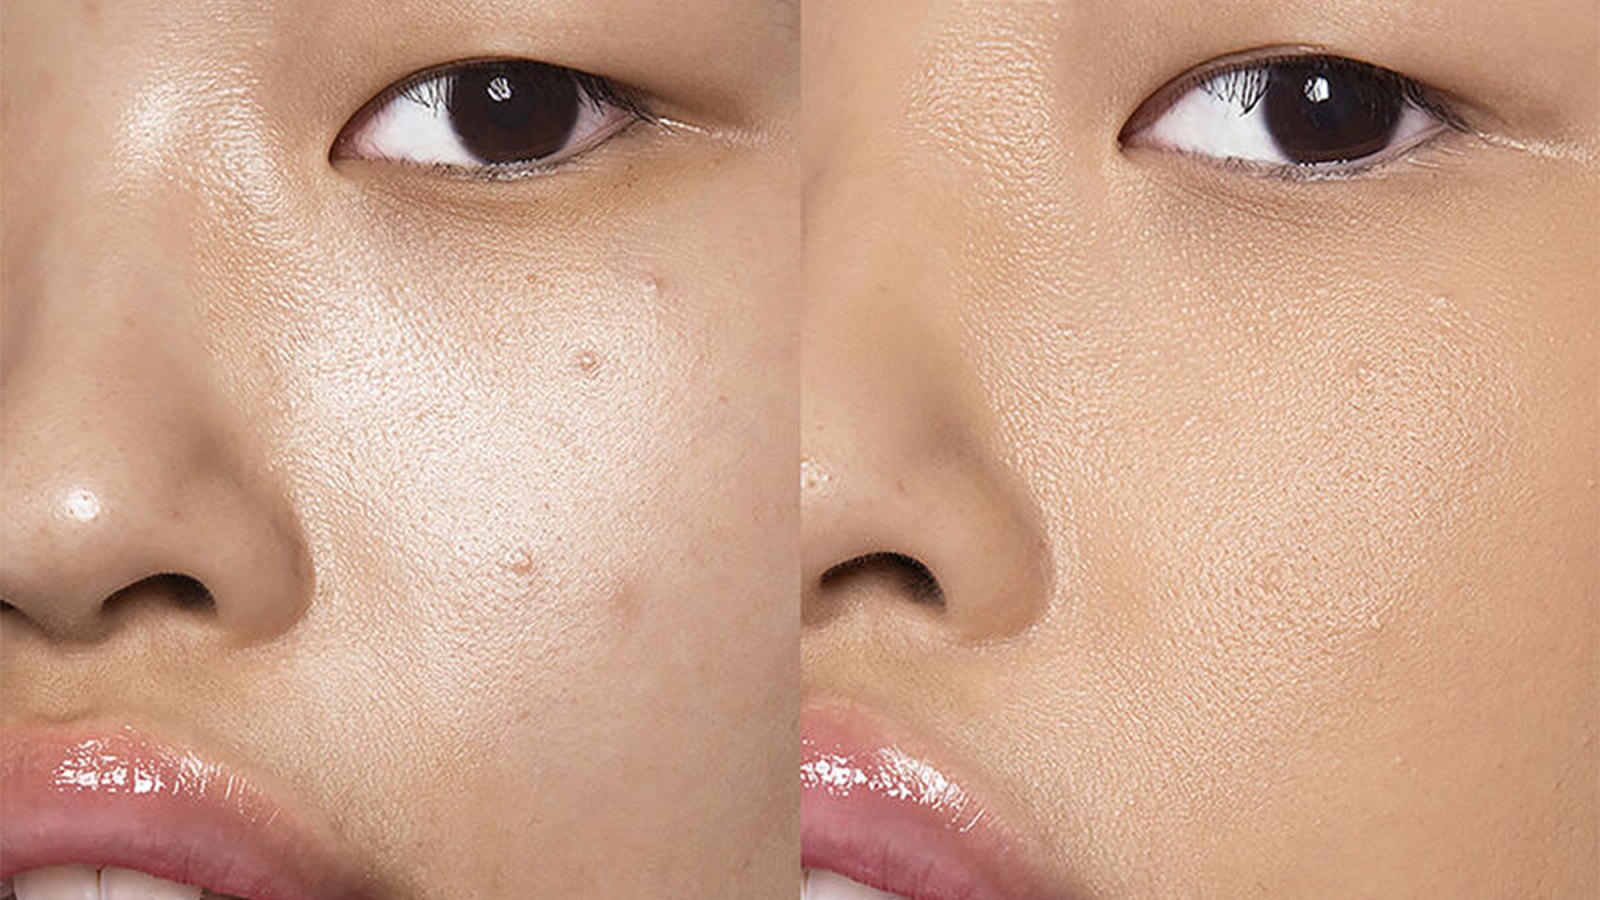 make-up-for-ever-hd-foundation-before-after